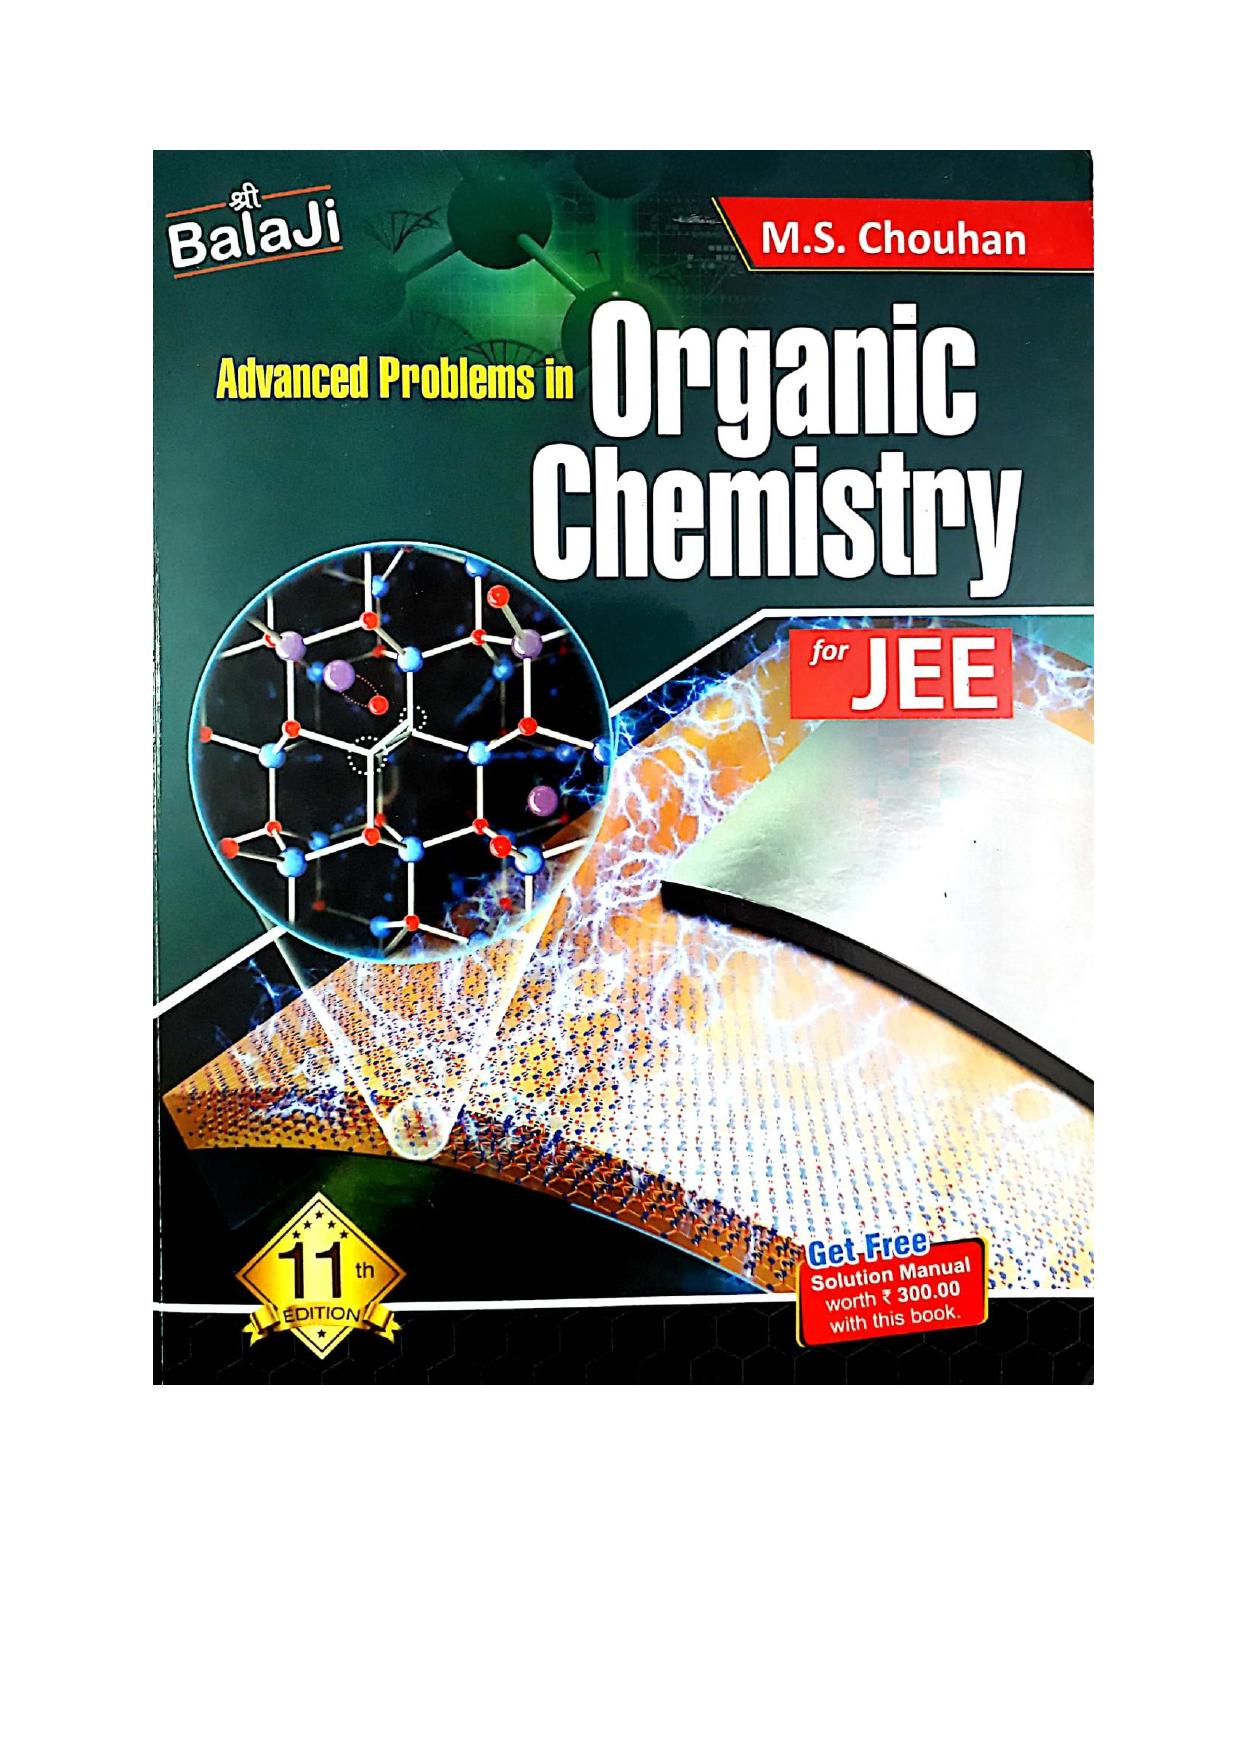 Balaji Advanced Problems in Organic Chemistry Part 1 upto page 240 by, 2019